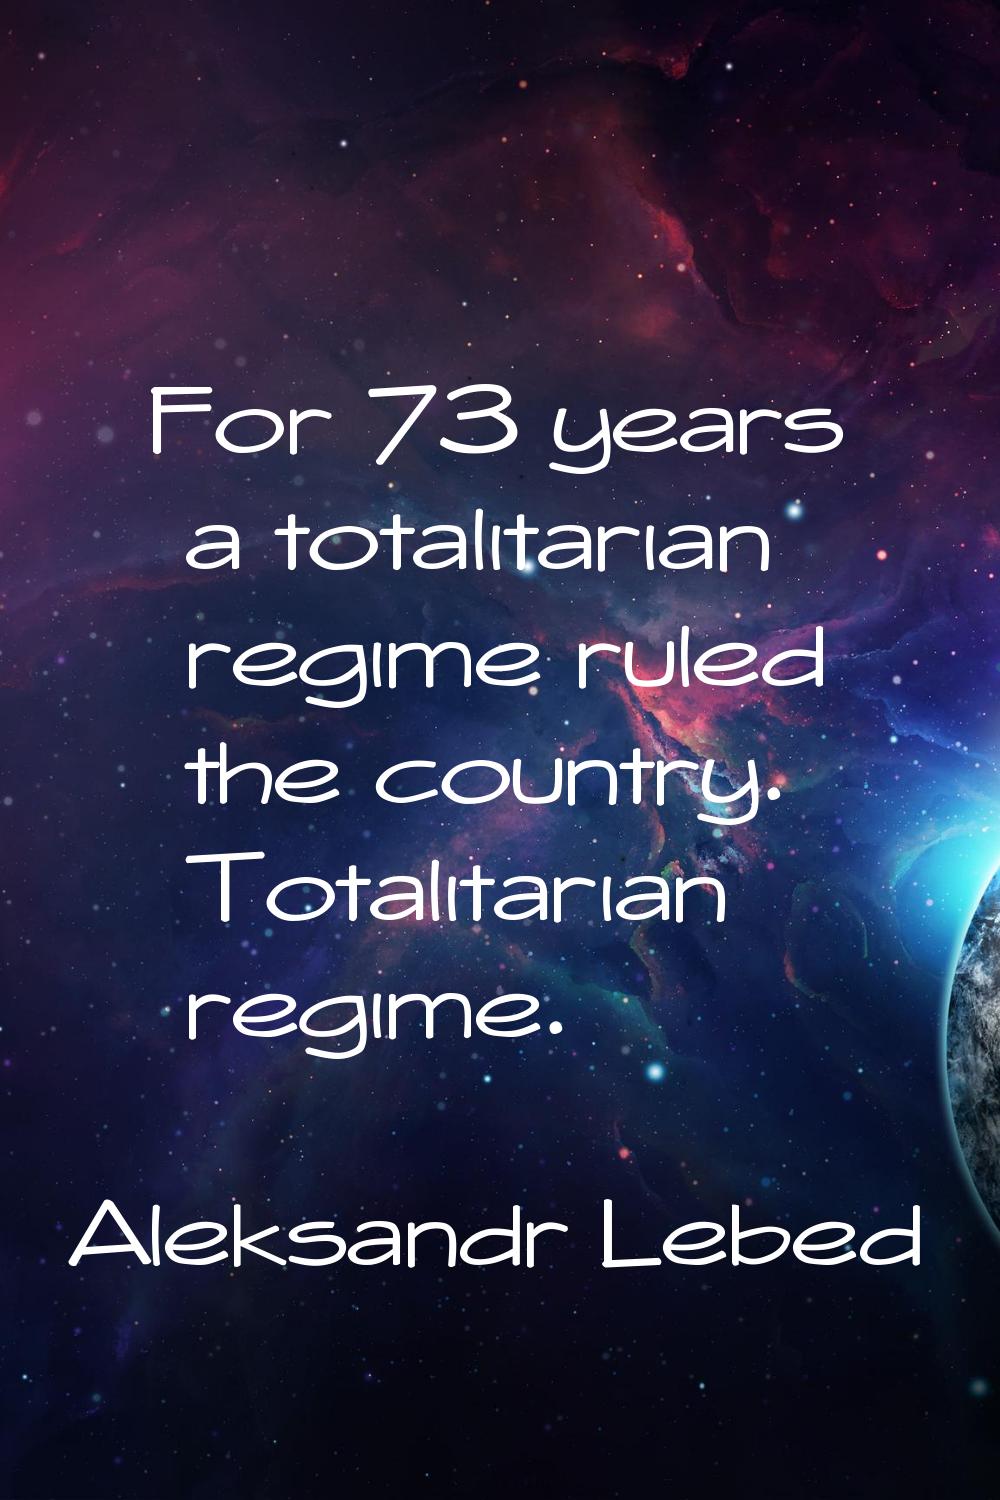 For 73 years a totalitarian regime ruled the country. Totalitarian regime.